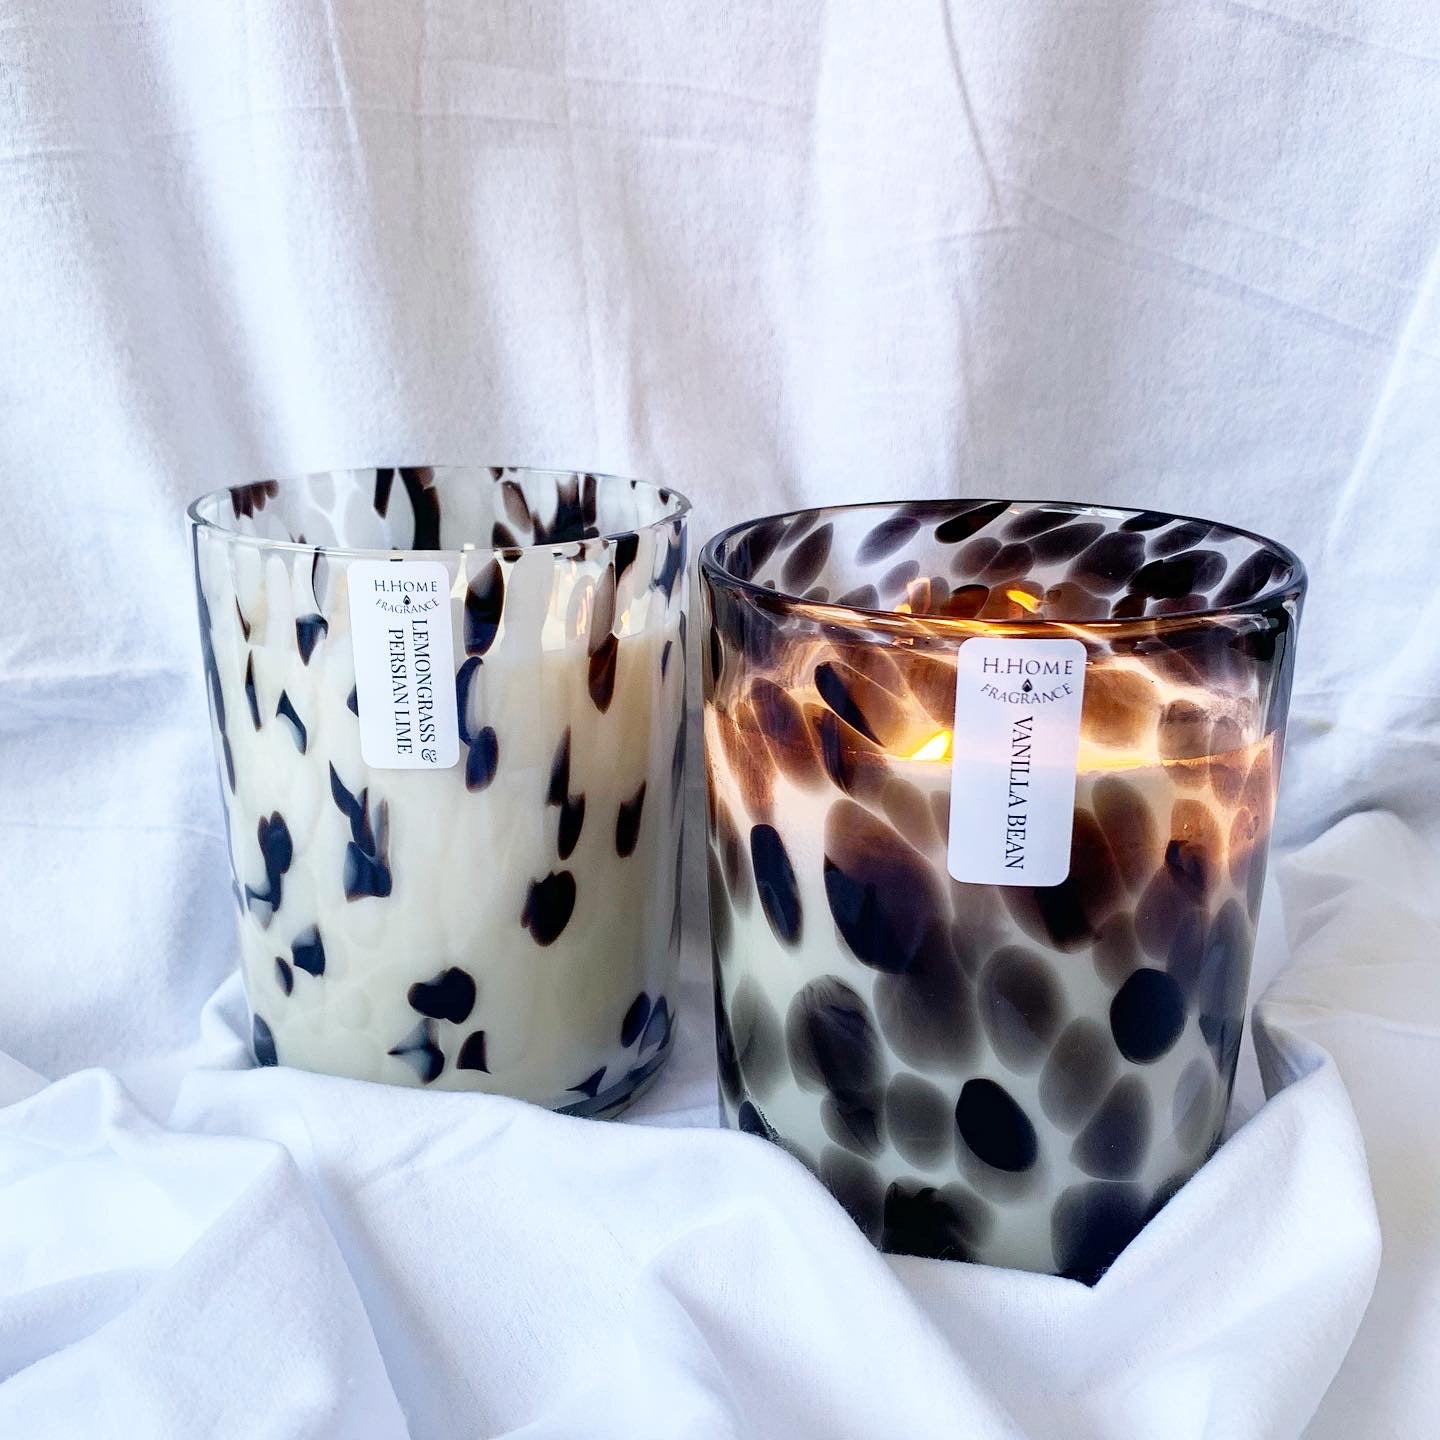 Grand Luxe Candles